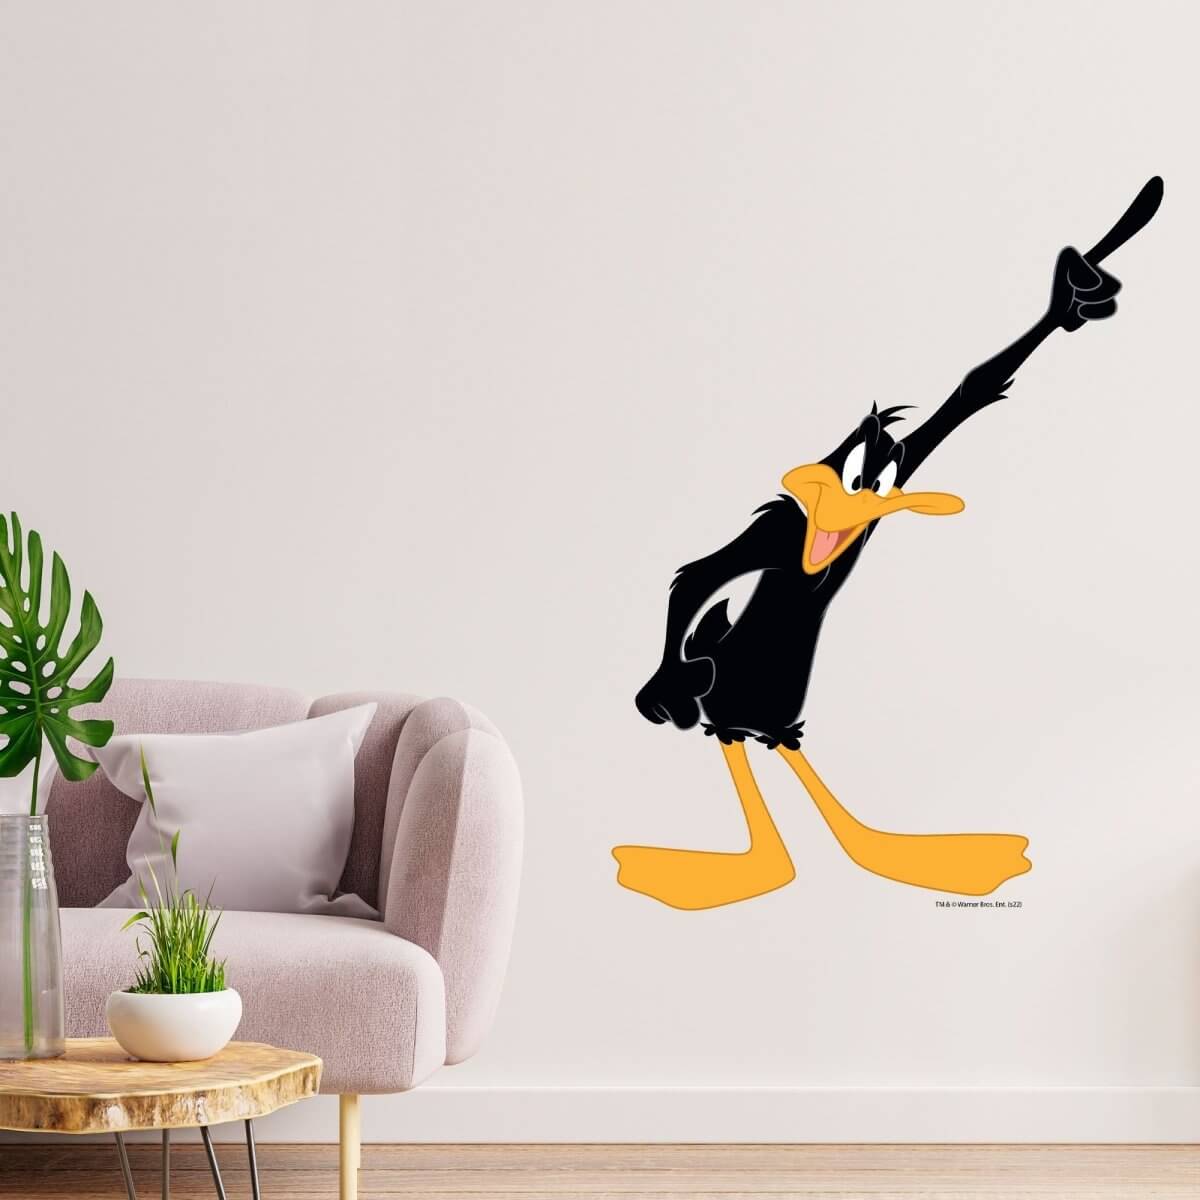 Kismet Decals Looney Tunes Daffy Duck Annoyed Licensed Wall Sticker - Easy DIY Home & Kids Room Decor Wall Decal Art - Kismet Decals